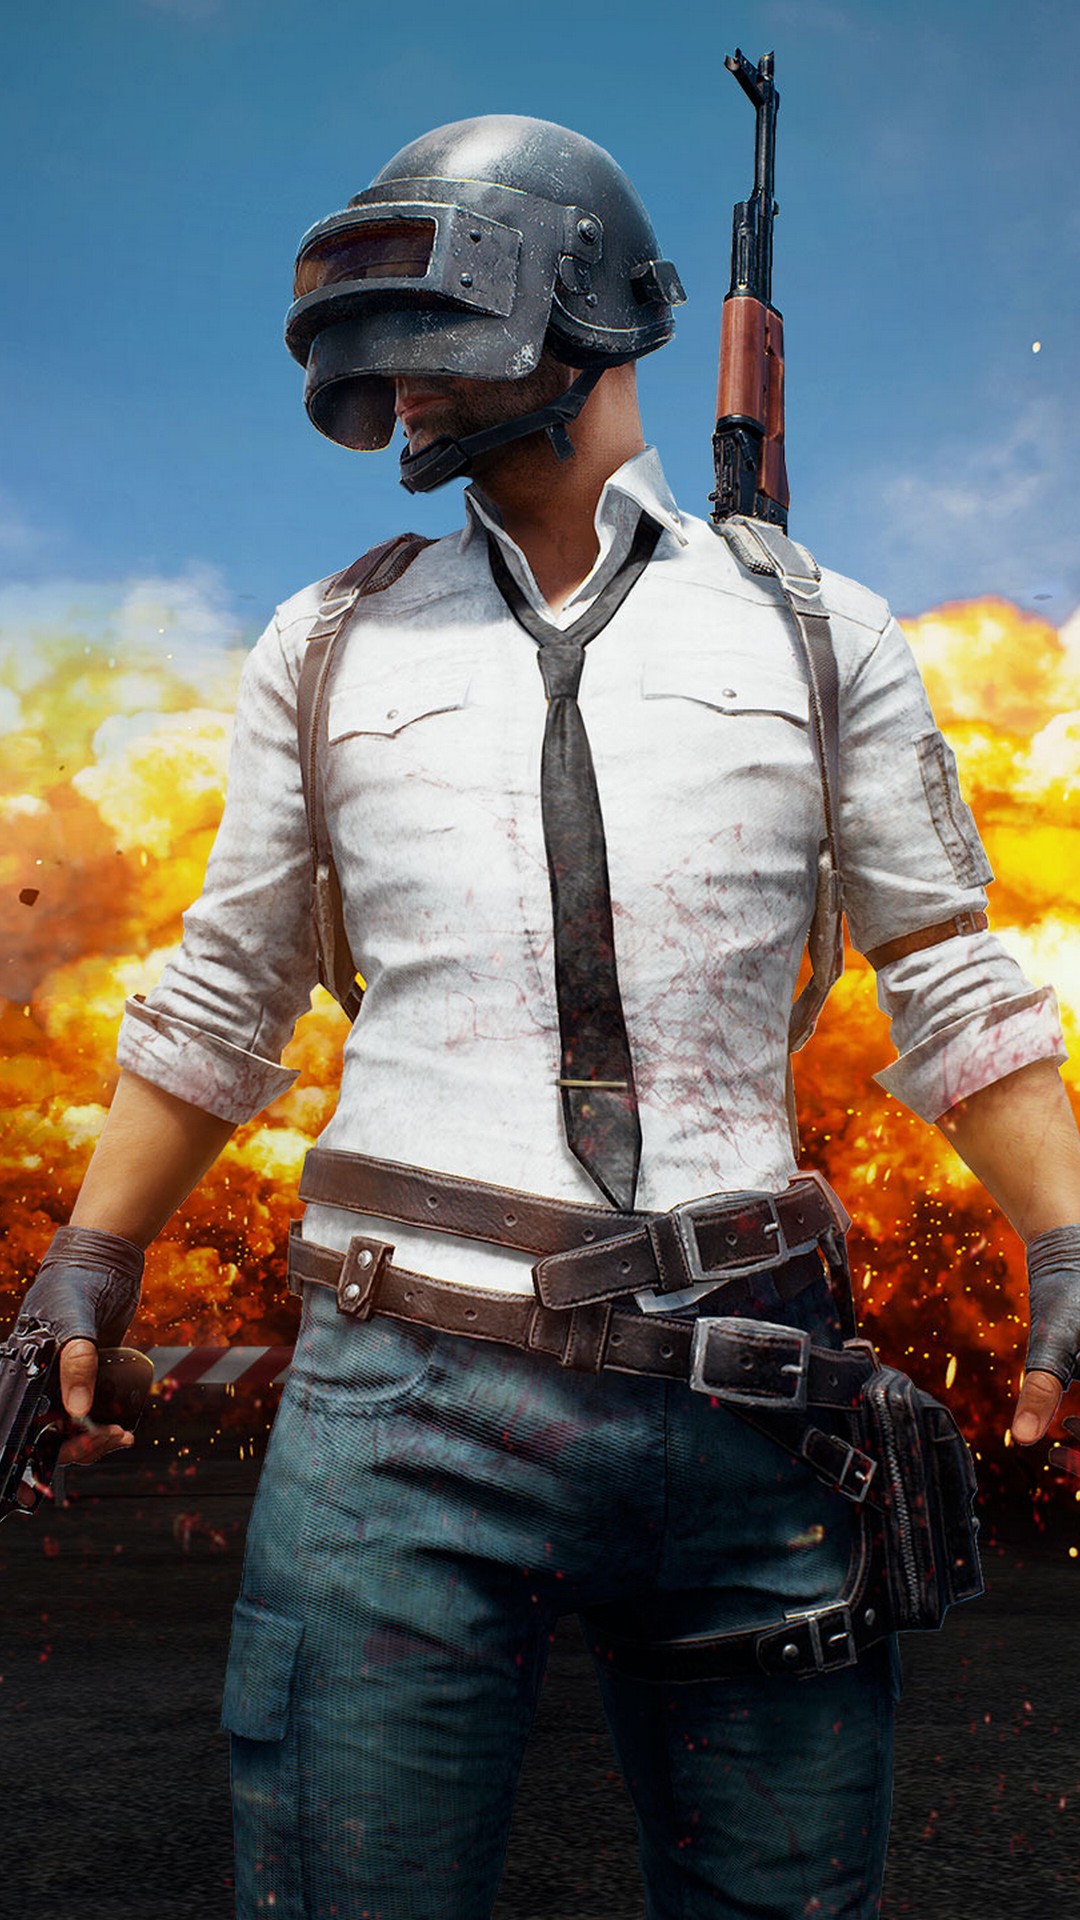 iPhone Wallpaper HD PUBG Mobile with image resolution 1080x1920 pixel. You can use this wallpaper as background for your desktop Computer Screensavers, Android or iPhone smartphones